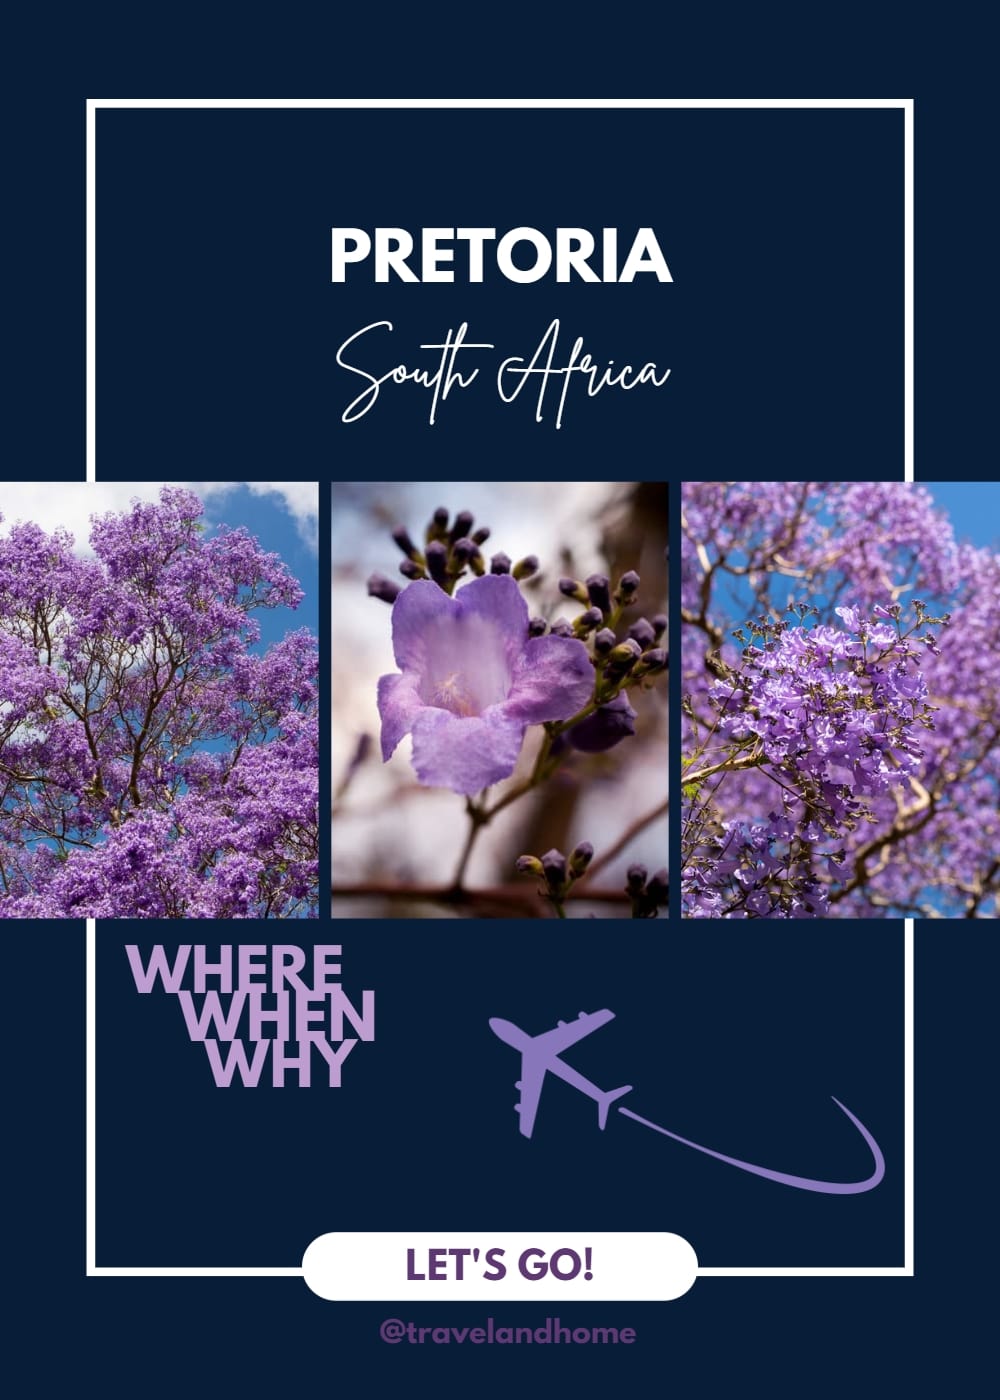 Best things to see in Pretoria history South African history is Pretoria expensive Is Pretoria a good place to go on holiday is Pretoria worth going to travel and home min